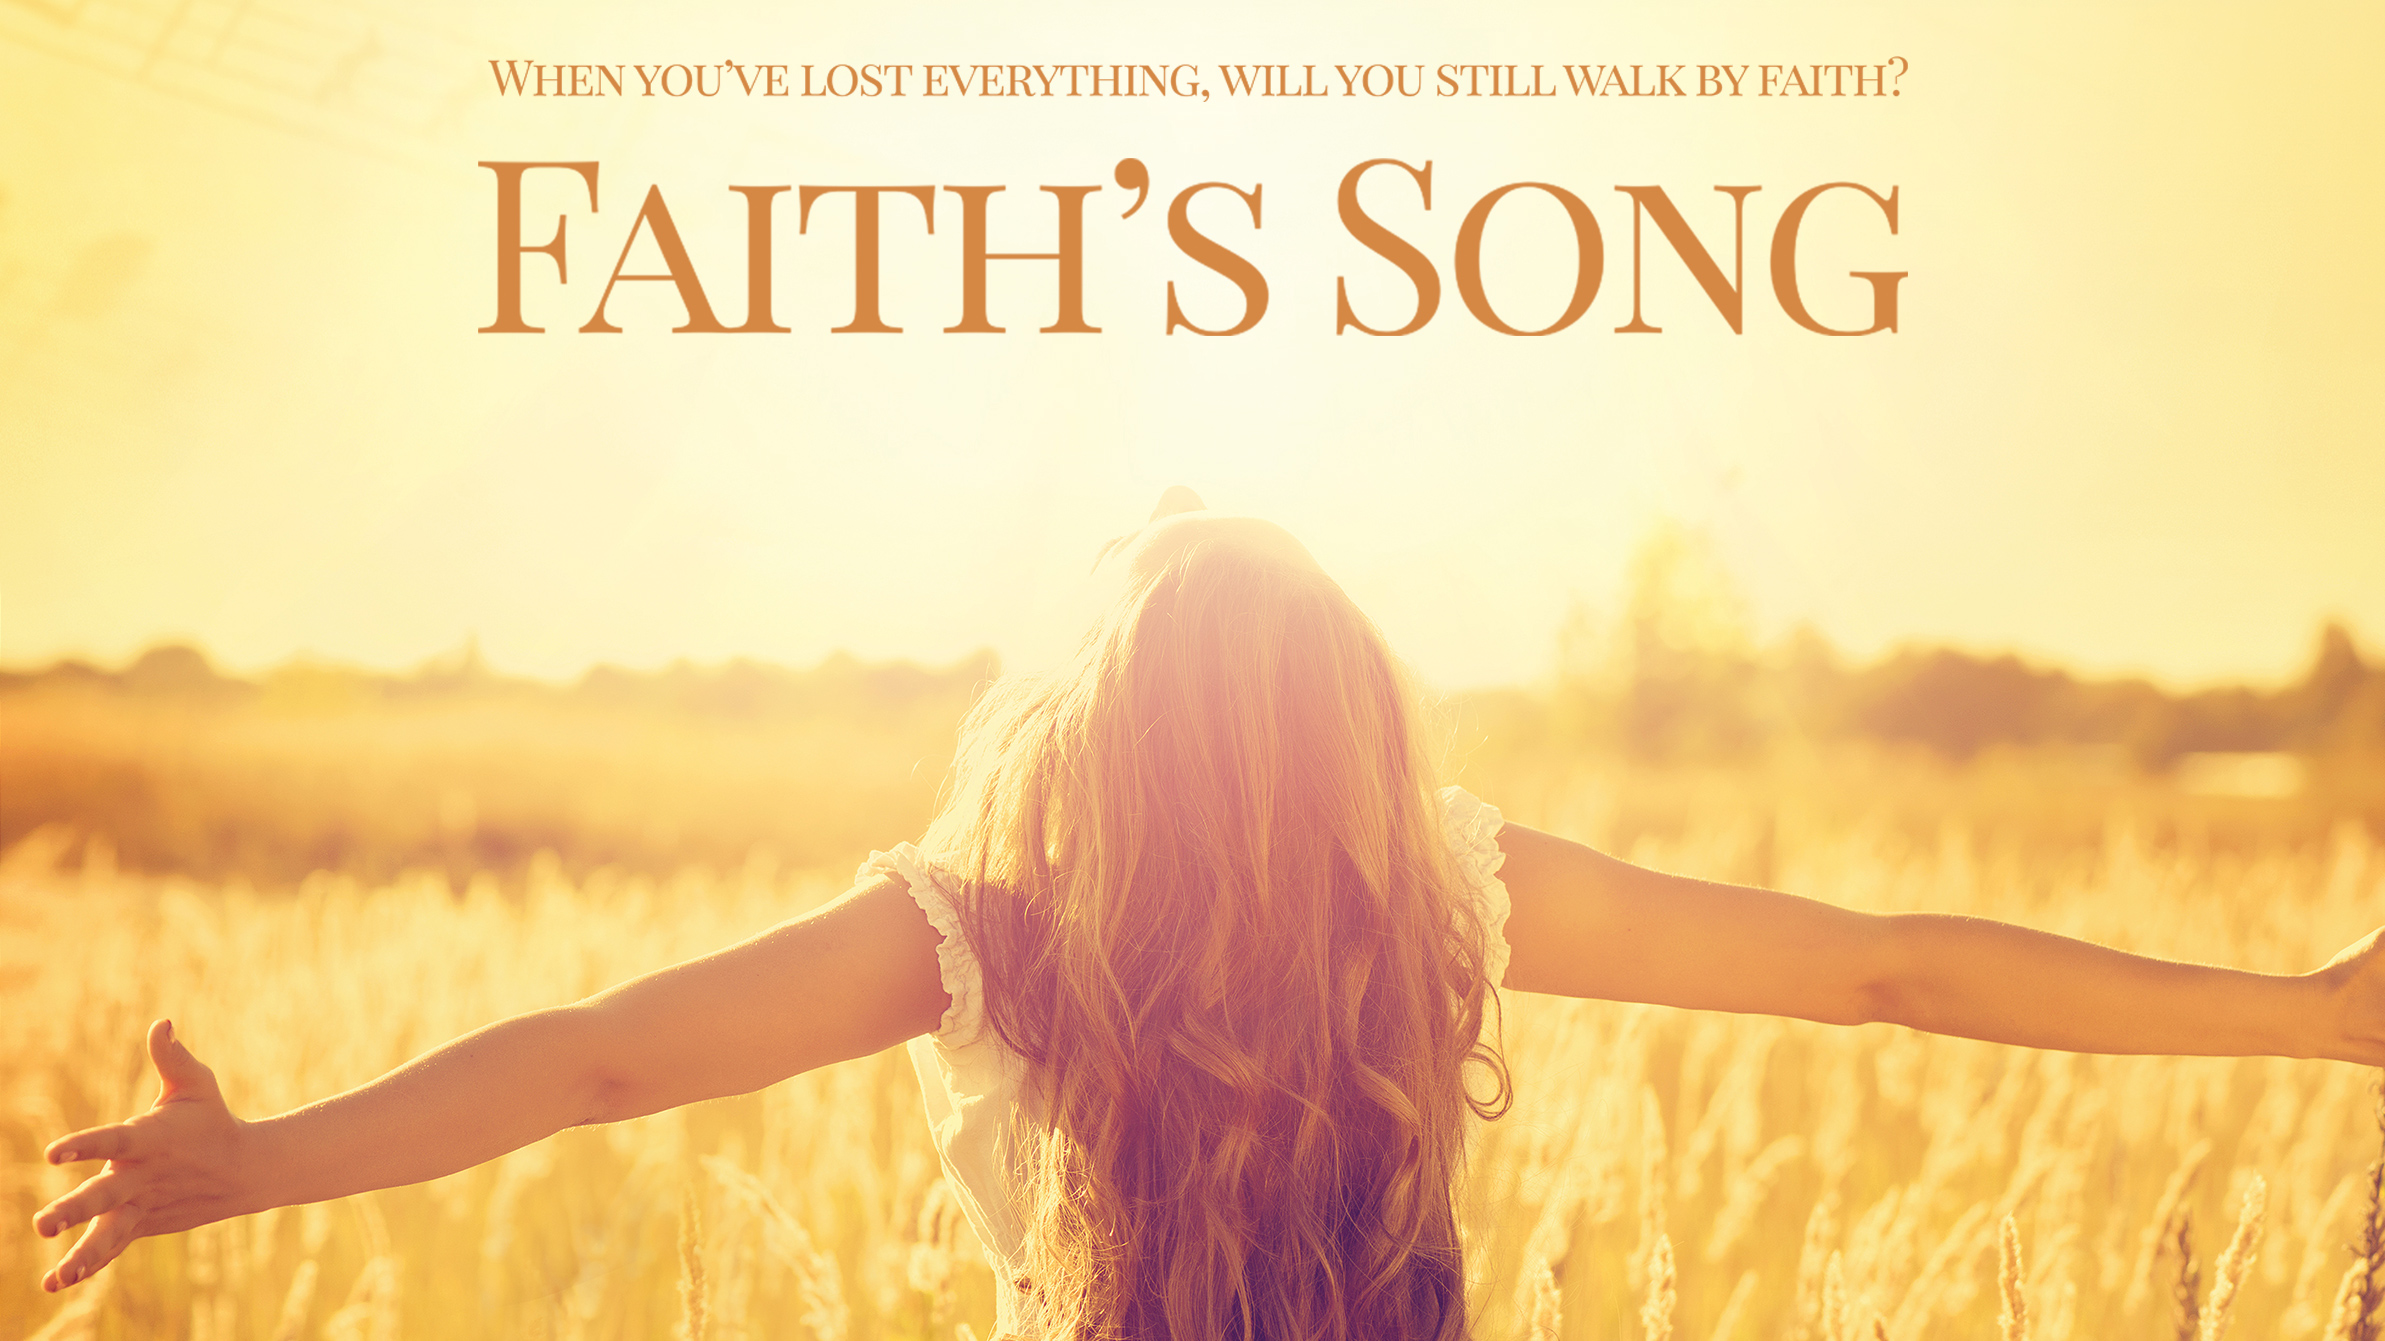 Faith's Song. A young girl’s faith is tested, when her parents are suddenly killed in a car accident and she’s forced to move in with relatives who don’t share her belief in God.